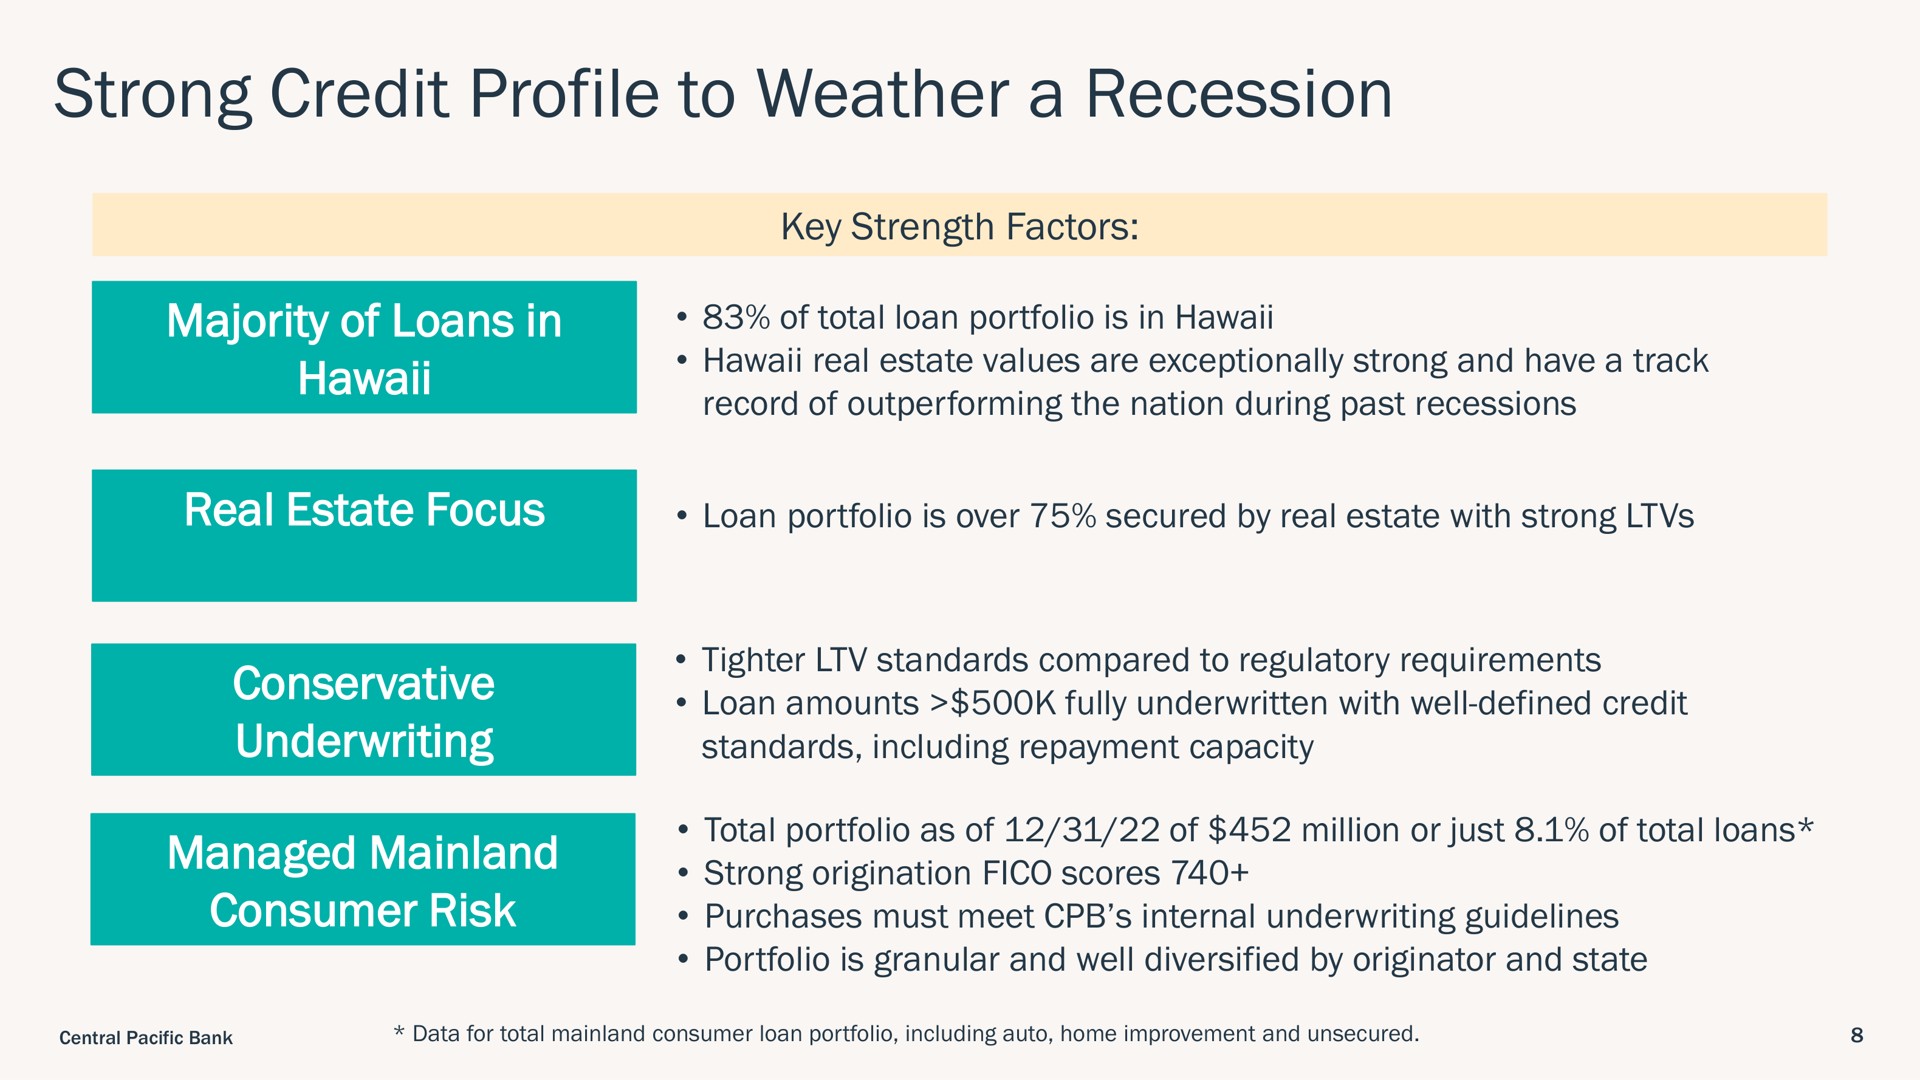 strong credit profile to weather a recession majority of loans in real estate focus conservative underwriting managed consumer risk ale total loan portfolio is loan portfolio is over secured by with standards including repayment capacity purchases must meet internal guidelines | Central Pacific Financial